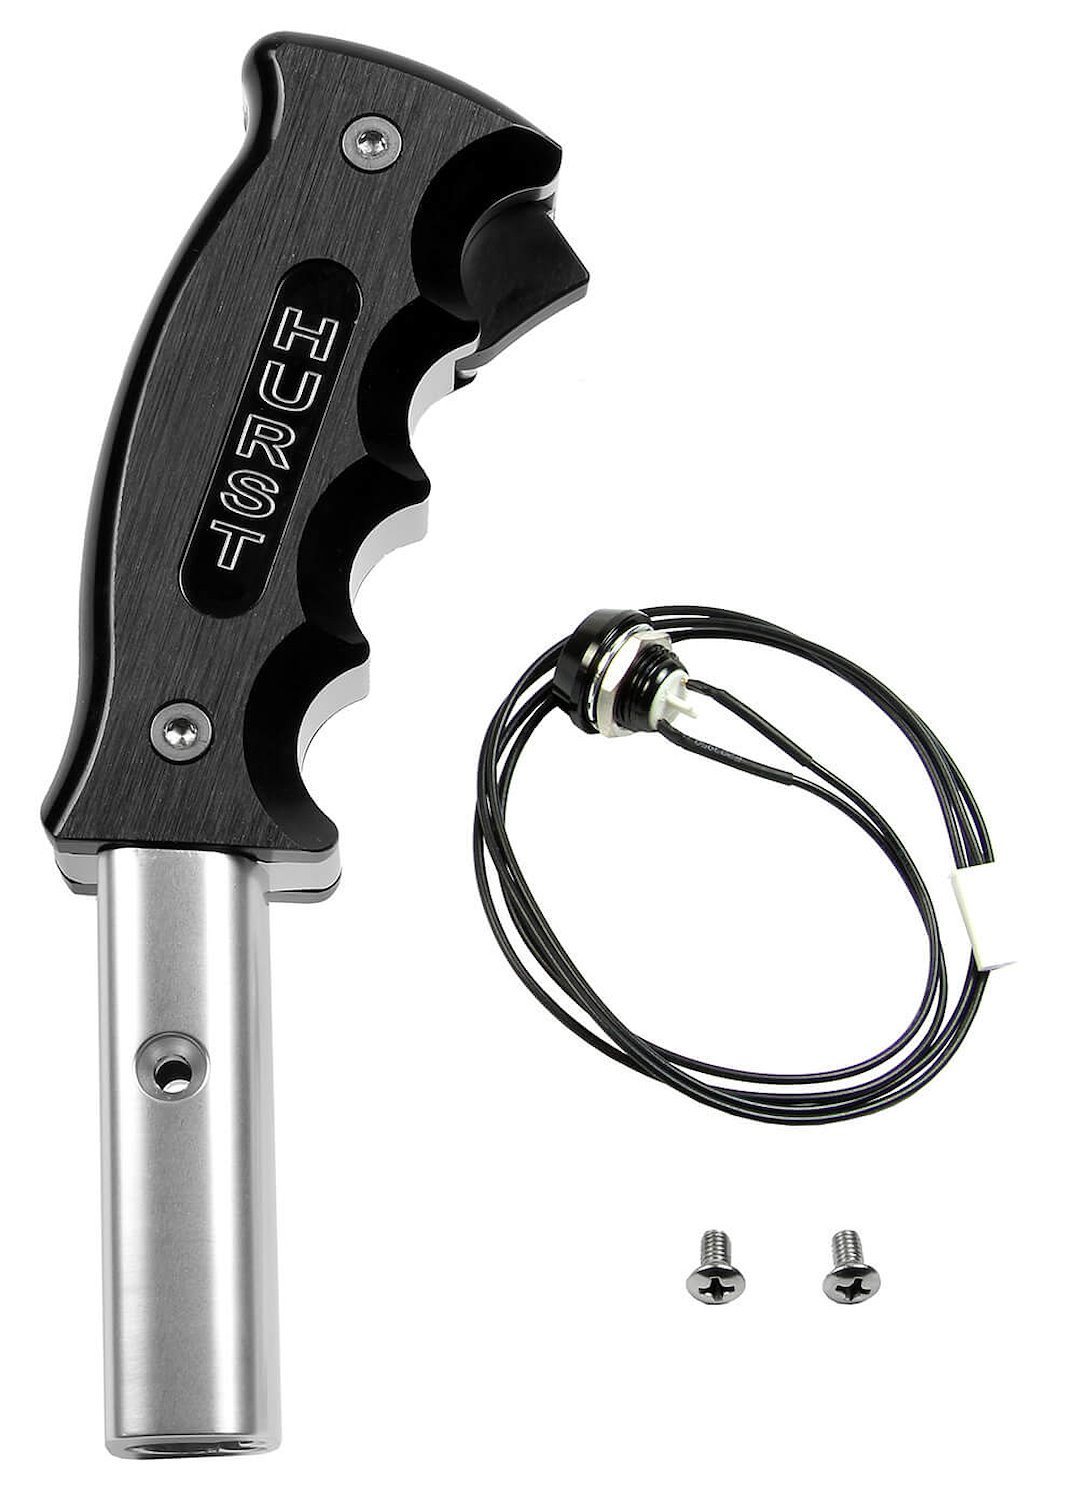 Billet Plus Shifter 2010-2012 Ford Mustang, Automatic Transmission